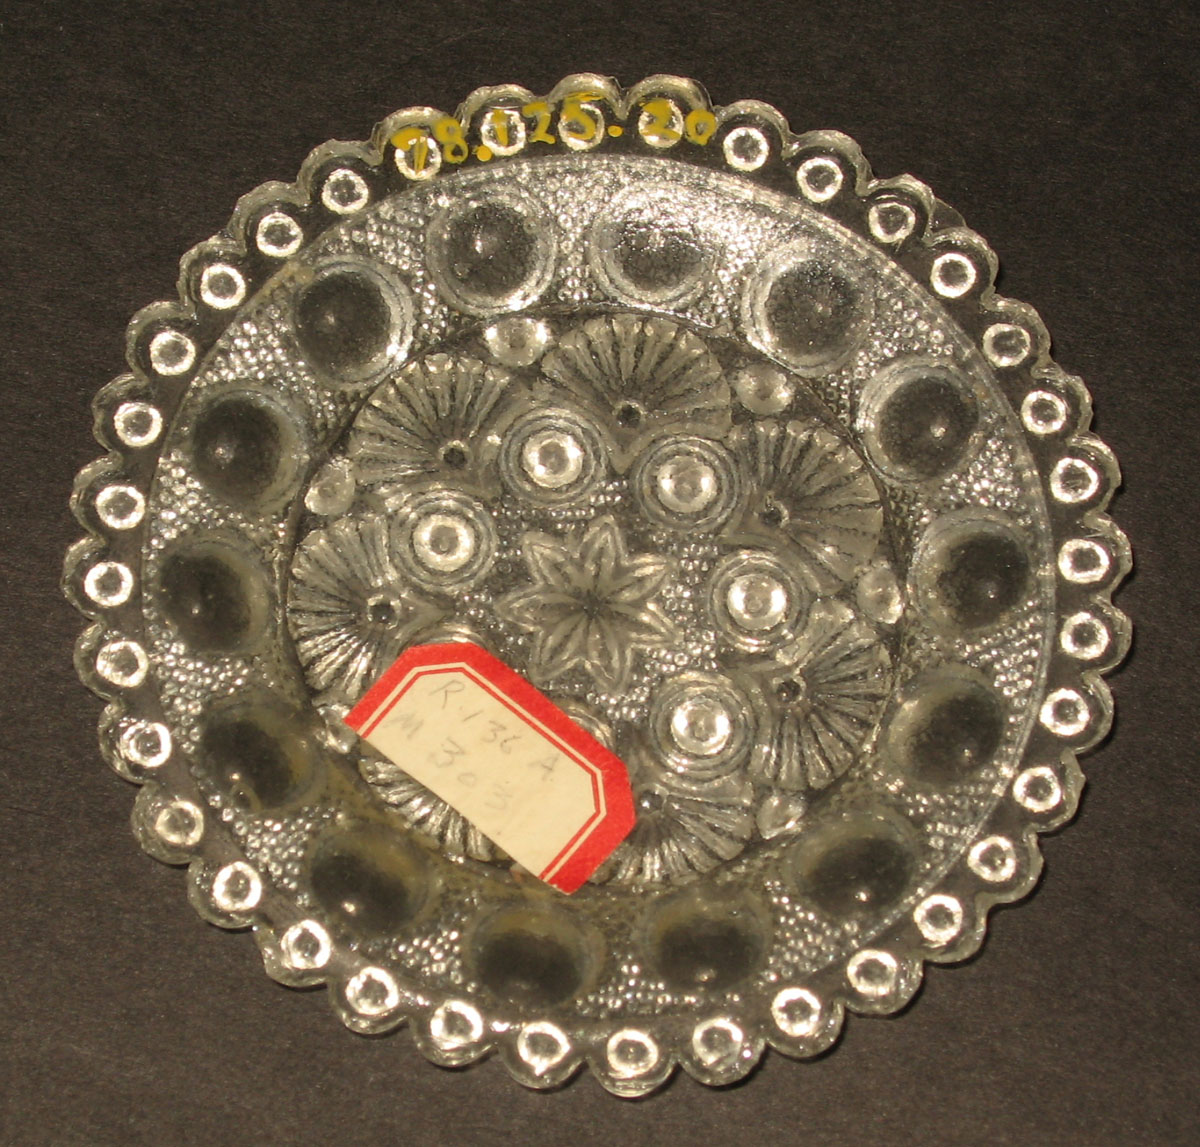 1978.0125.020 Glass cup plate